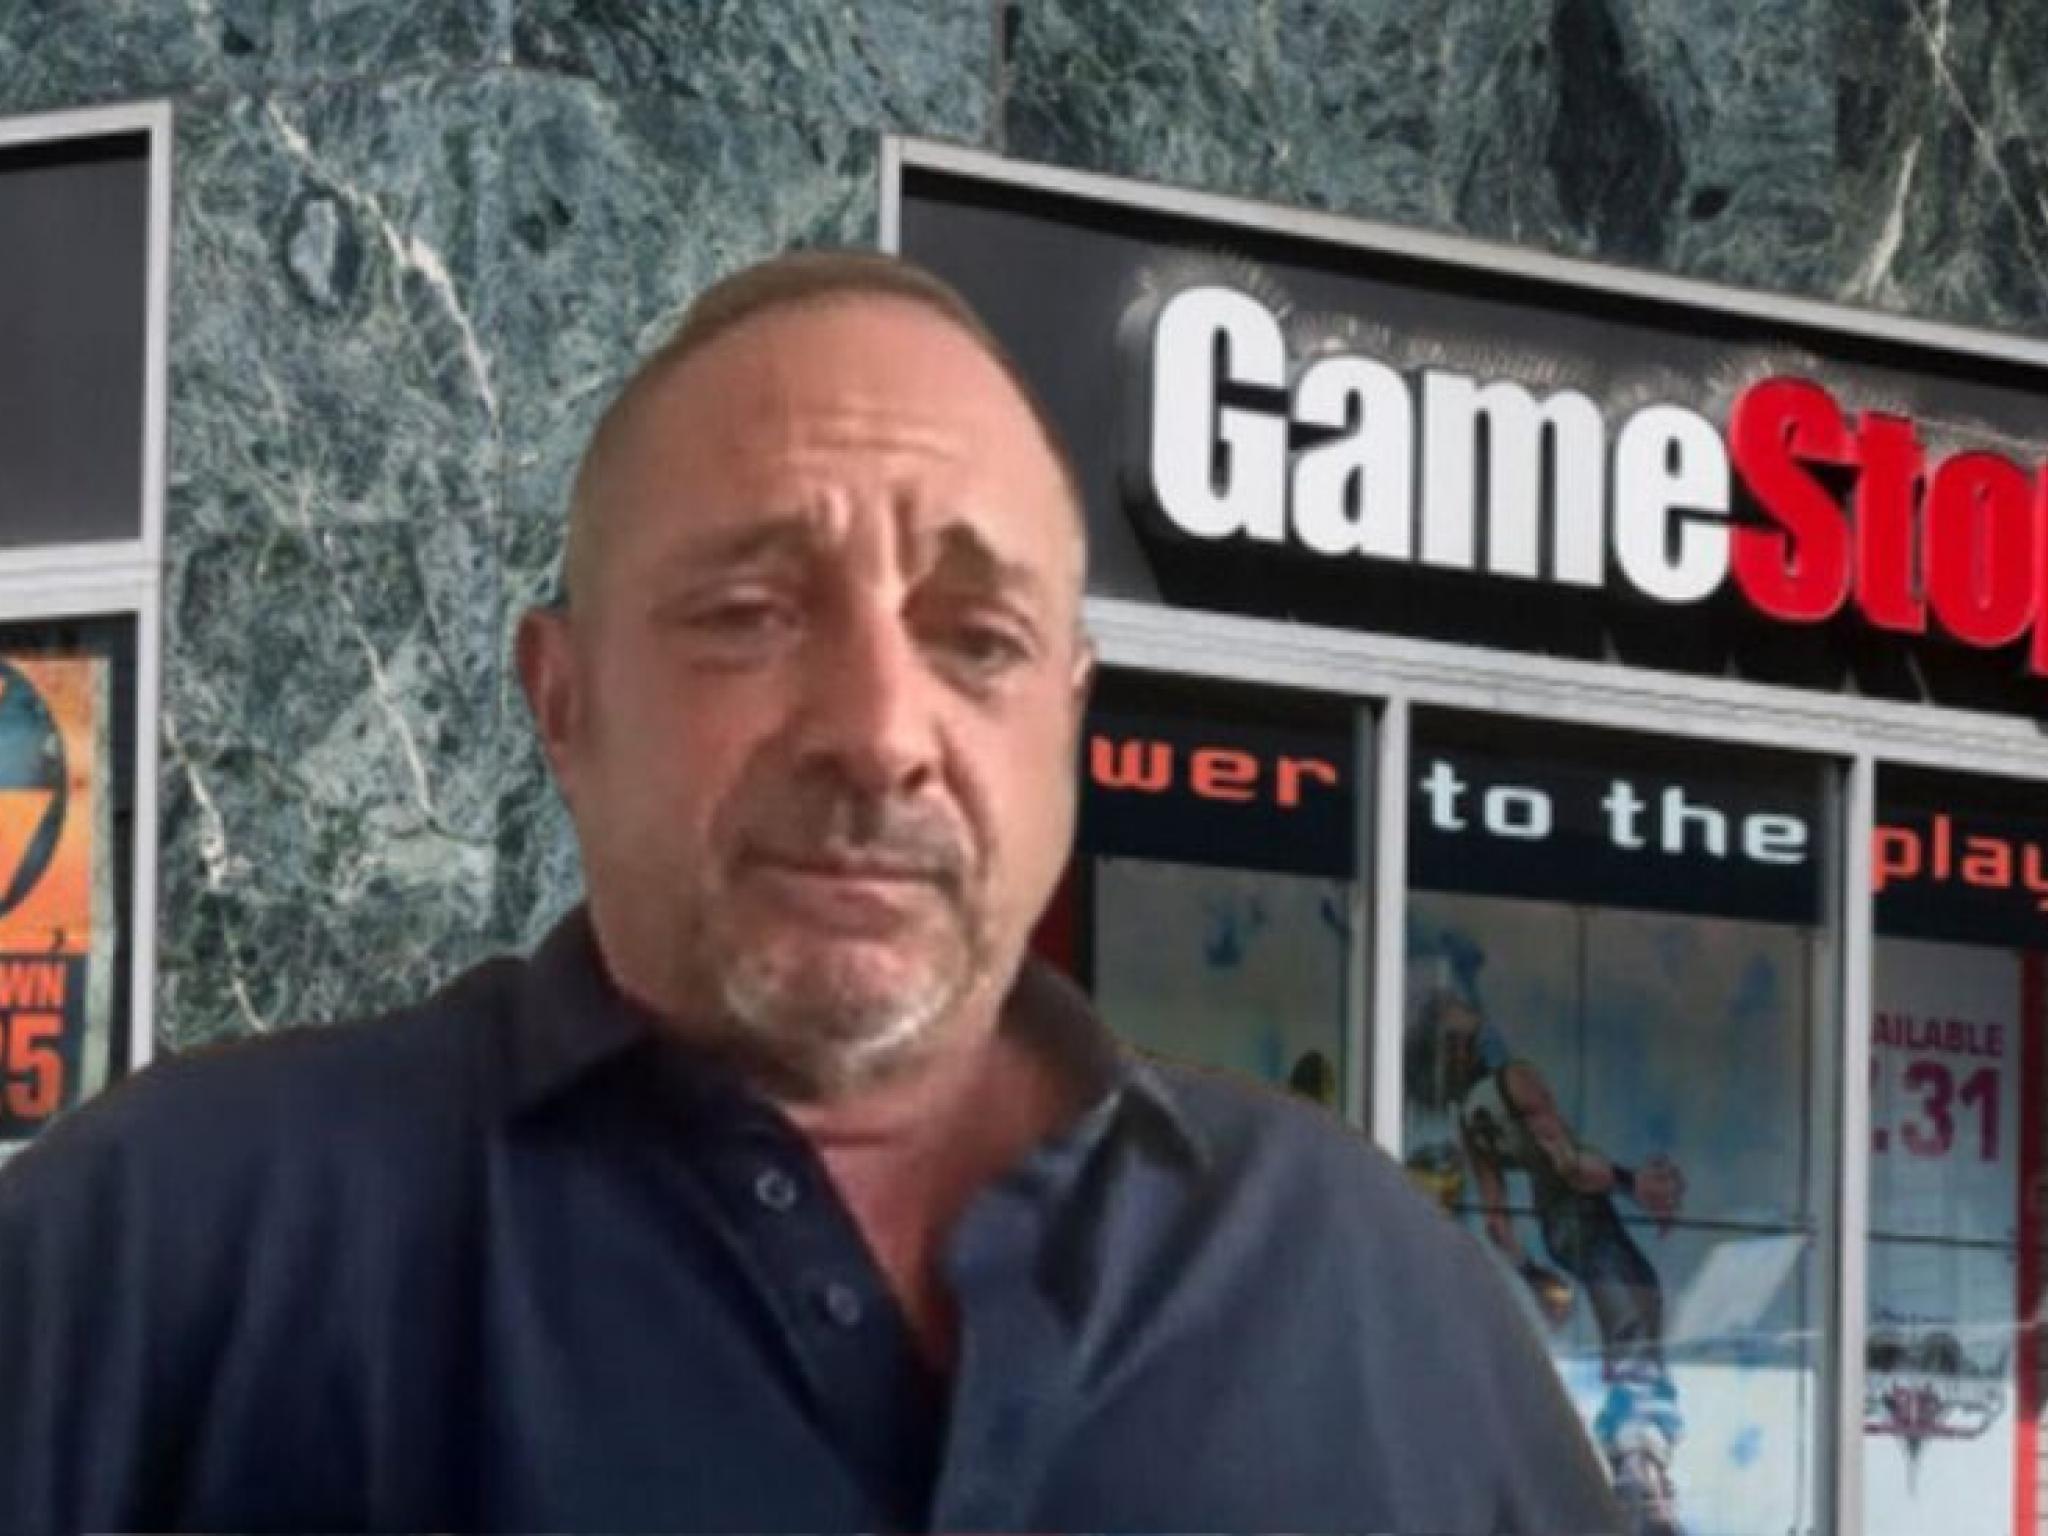  so-much-is-wrong-short-seller-andrew-left-says-roaring-kitty-trying-to-take-advantage-of-retail-traders-after-revealing-huge-gamestop-position 